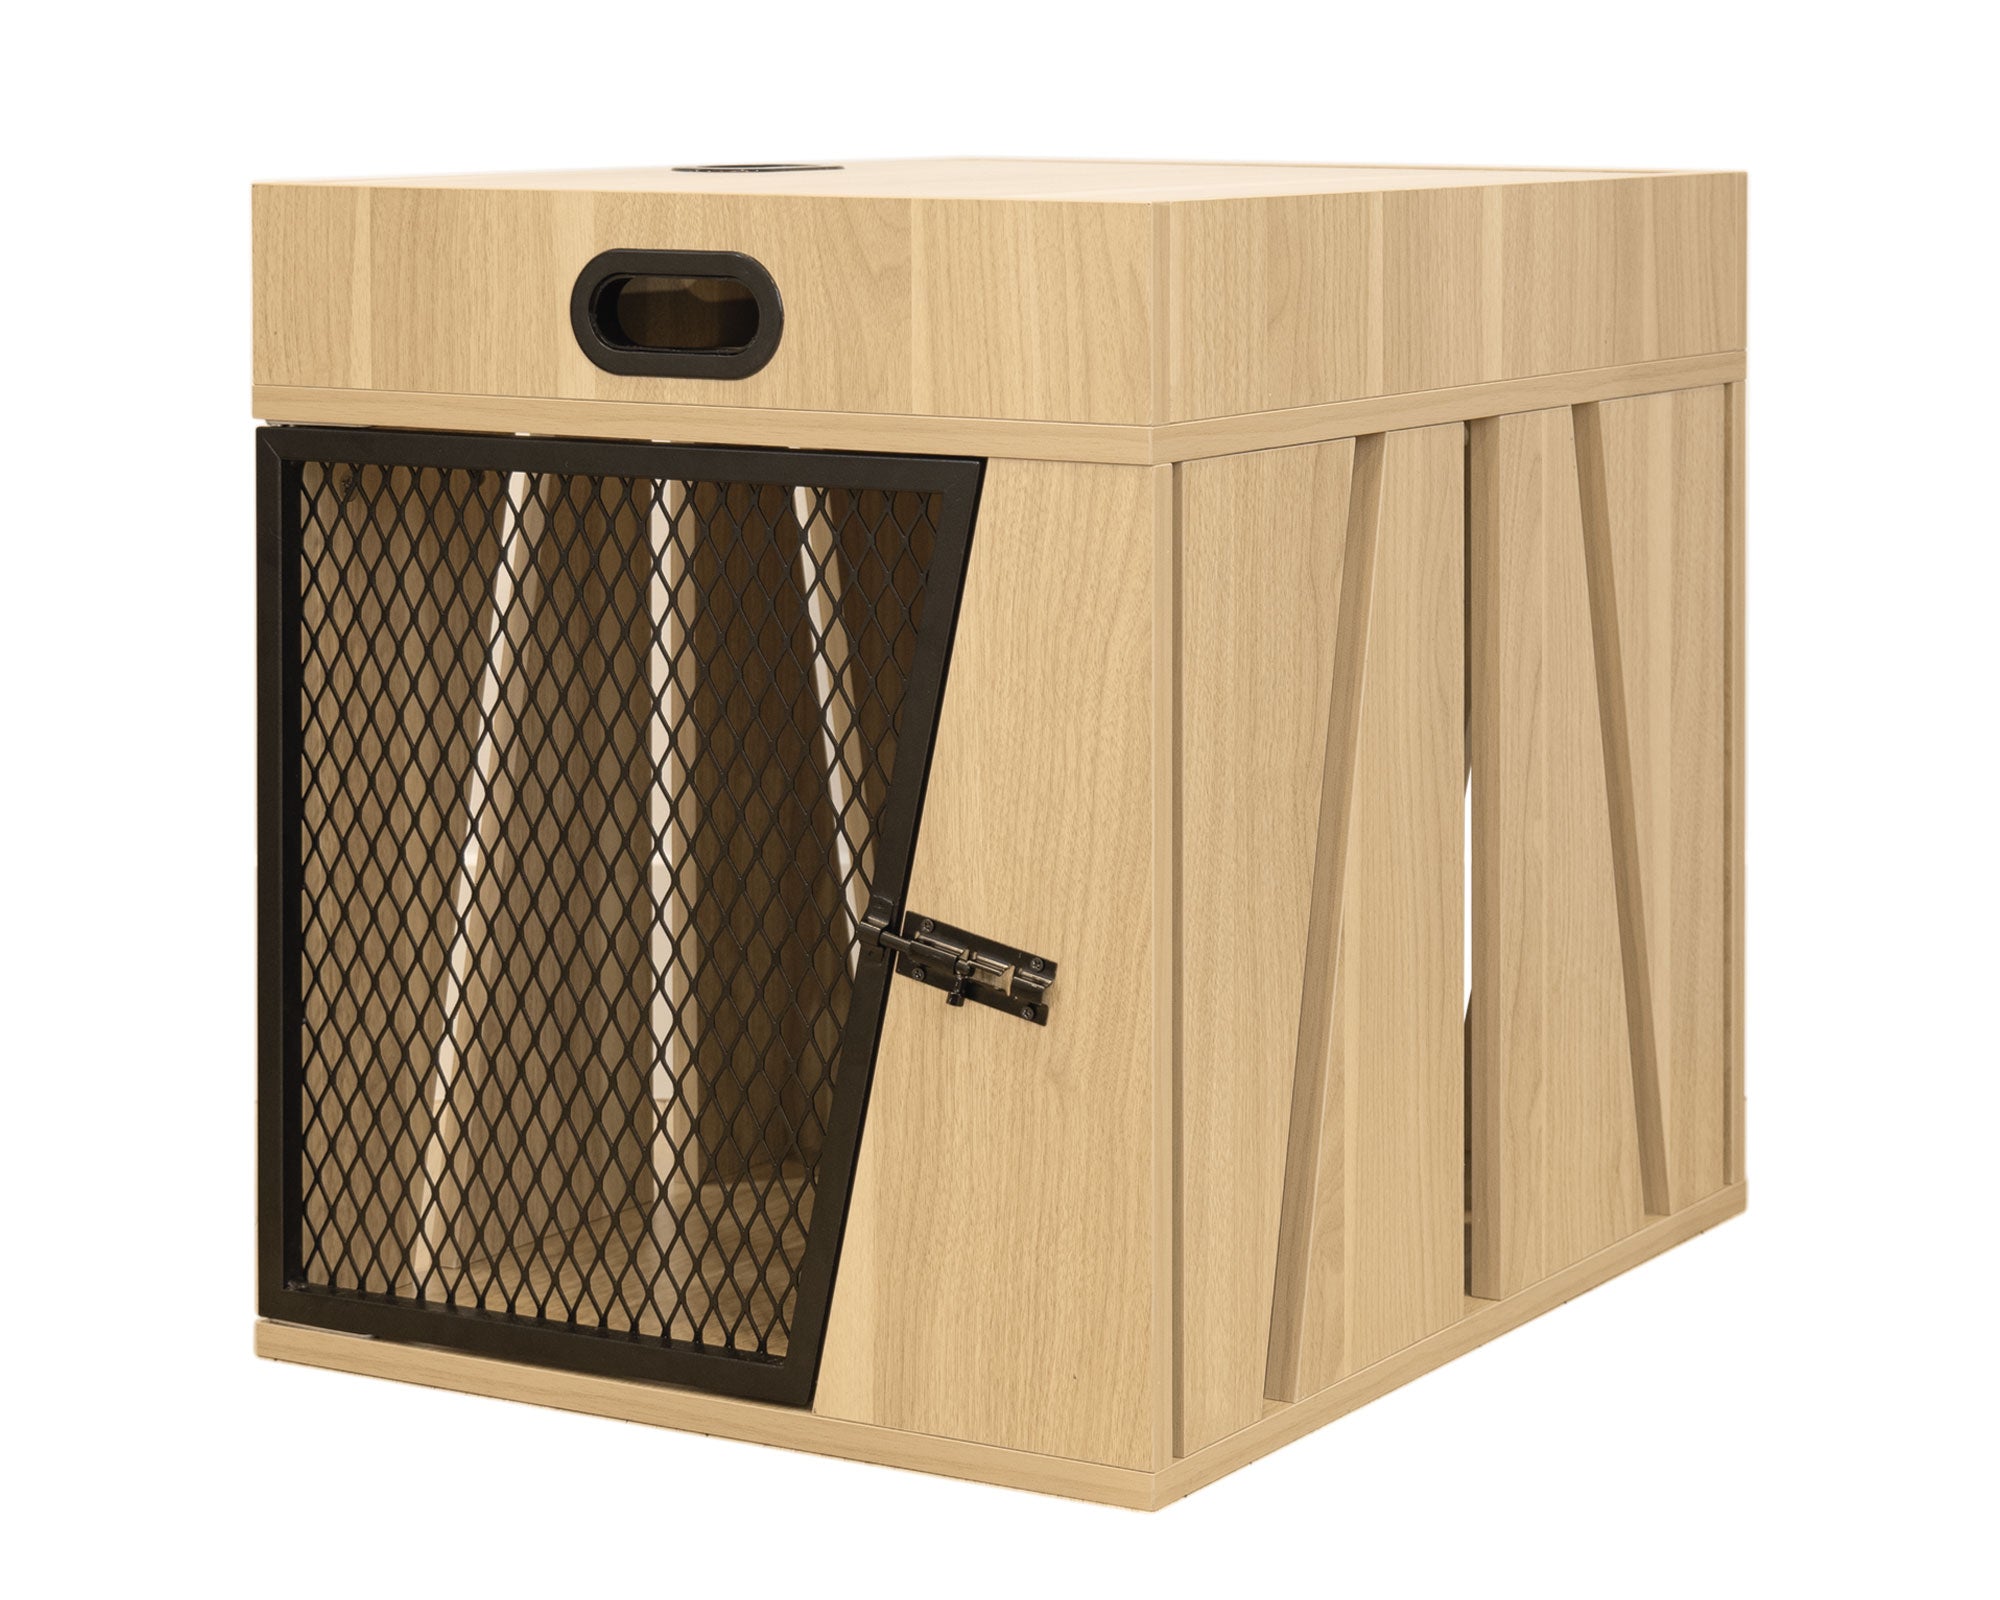 Lucky Kennels Penny Pet Crate, Modern Dog Crate, Designer Cat Crate, Geometric Wooden Pet Crate, Cozy Pet House with Side Table, Storage Compartment for Leashes, Treats, Beds